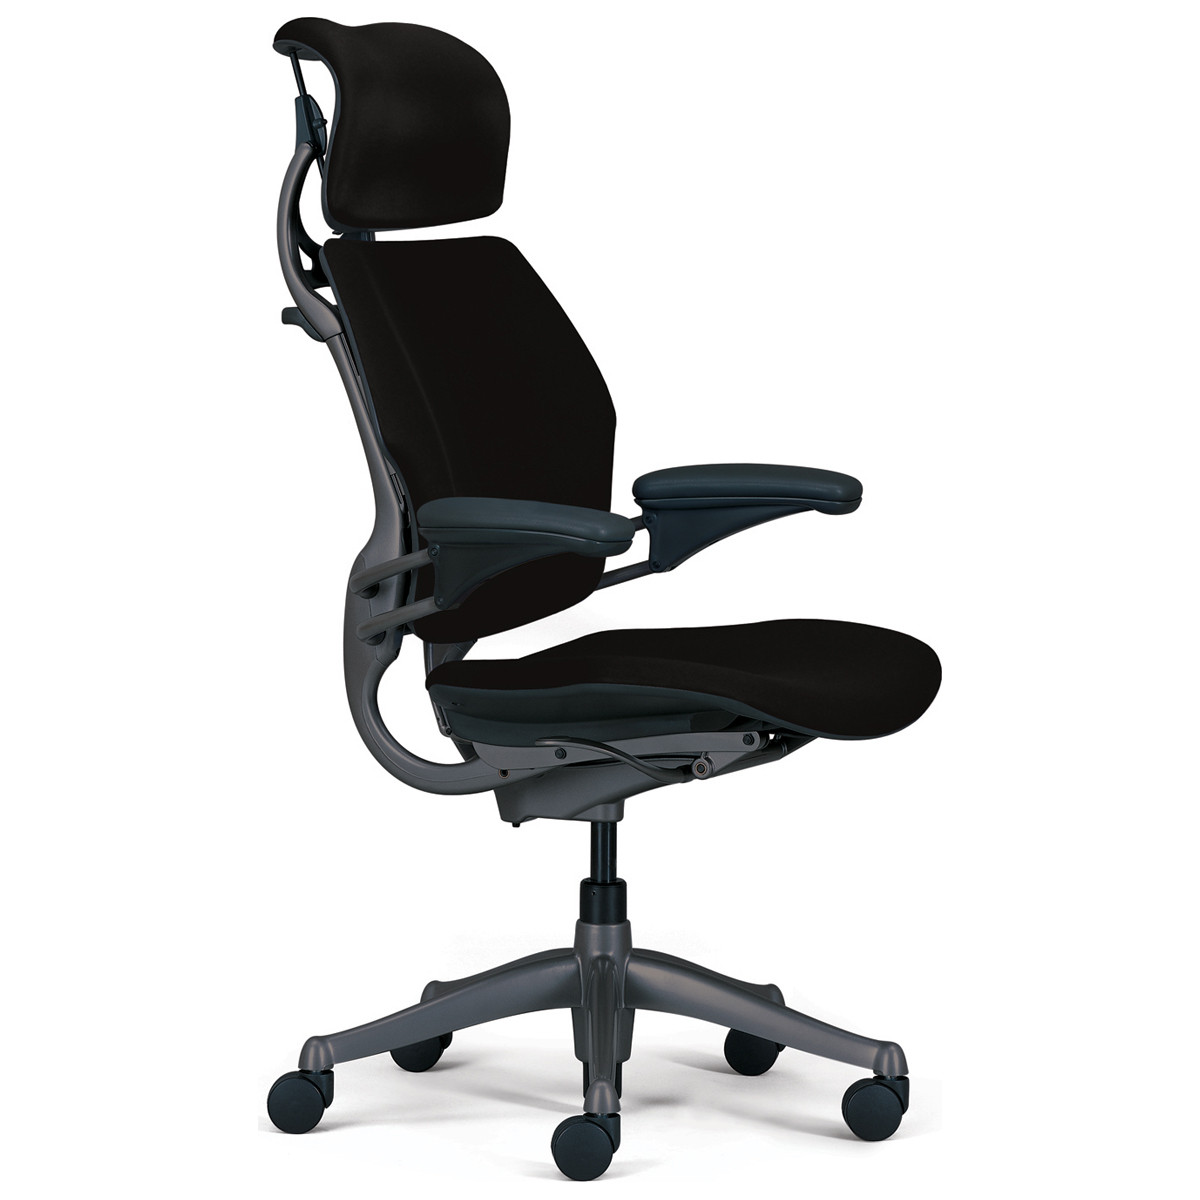 humanscale freedom chair an ergonomic chair with modern